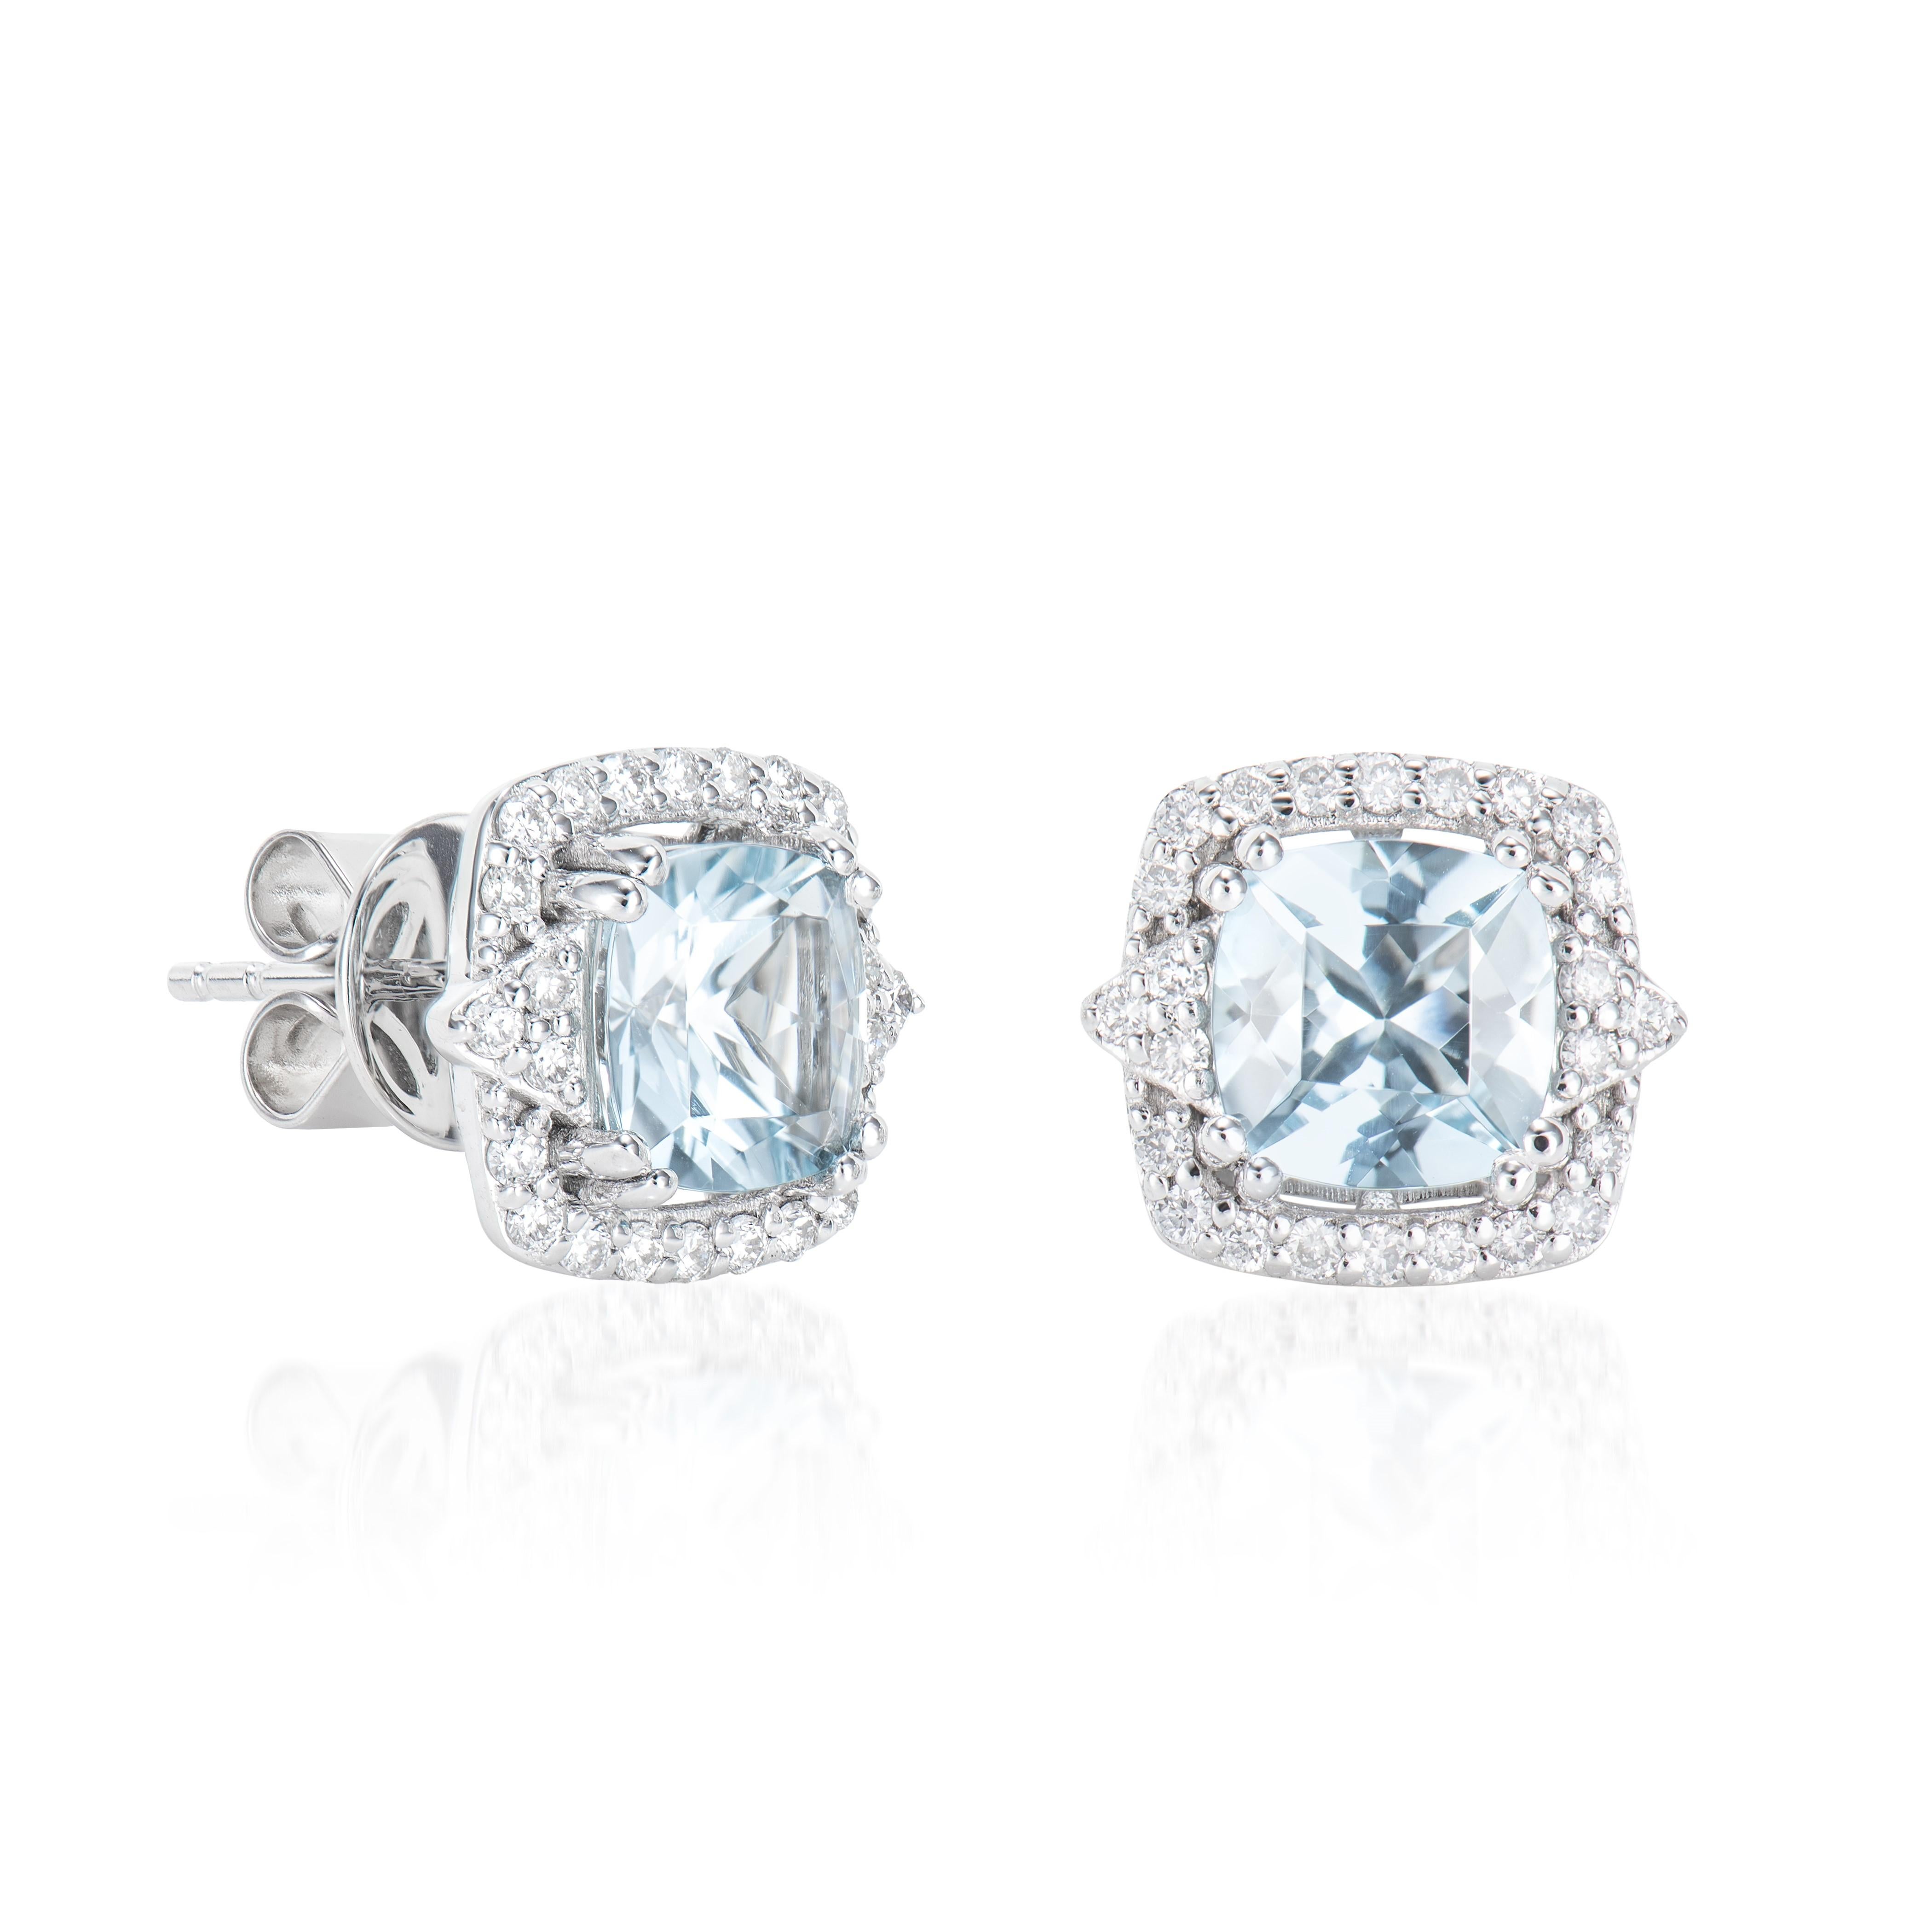 This collection features an array of aquamarines with an icy blue hue that is as cool as it gets! Accented with White Diamonds these Stud Earrings are made in white gold and present a classic yet elegant look. 

Aquamarine Stud Earrings in 18Karat